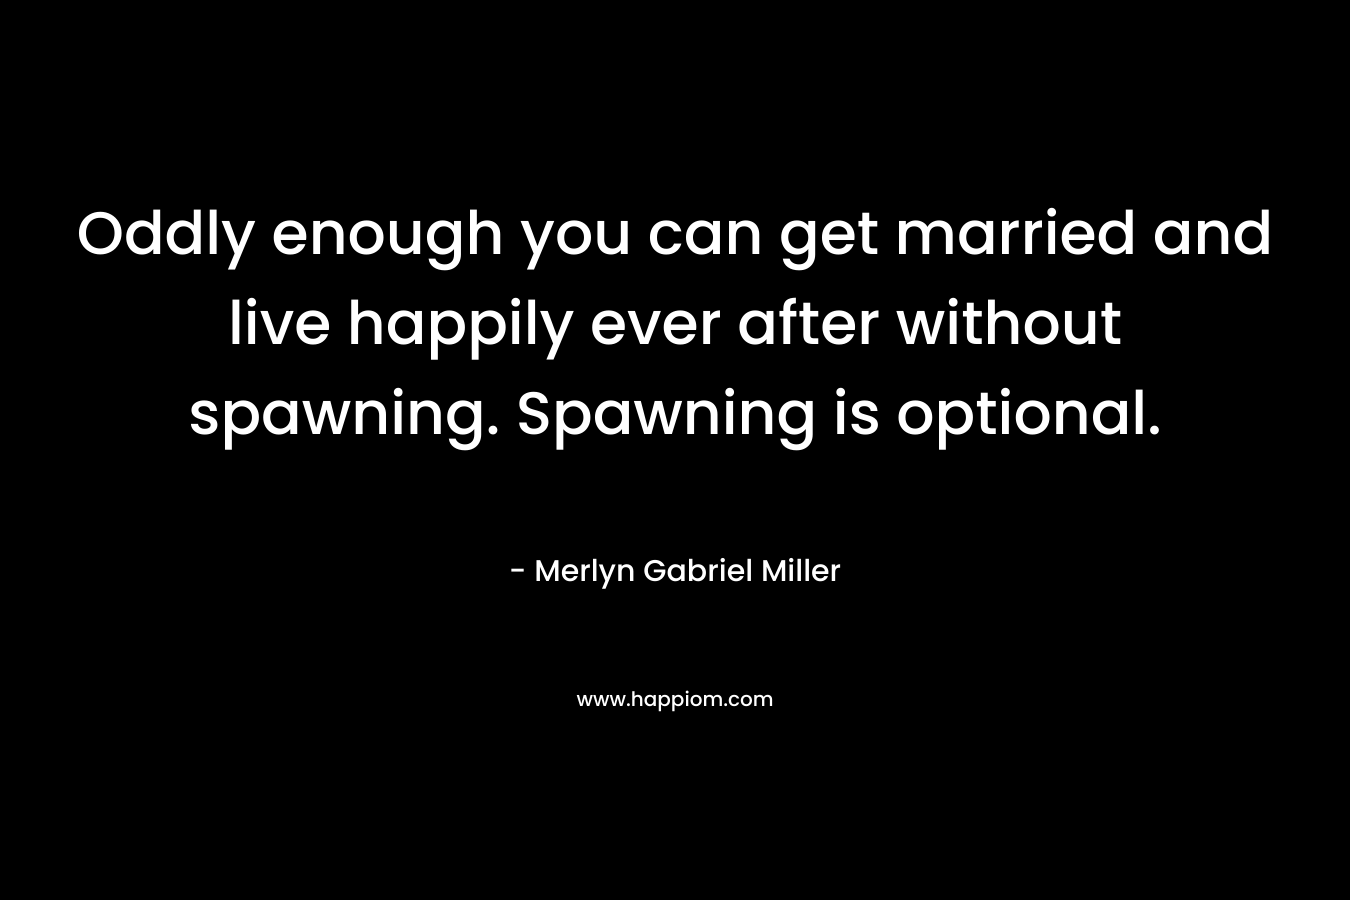 Oddly enough you can get married and live happily ever after without spawning. Spawning is optional.